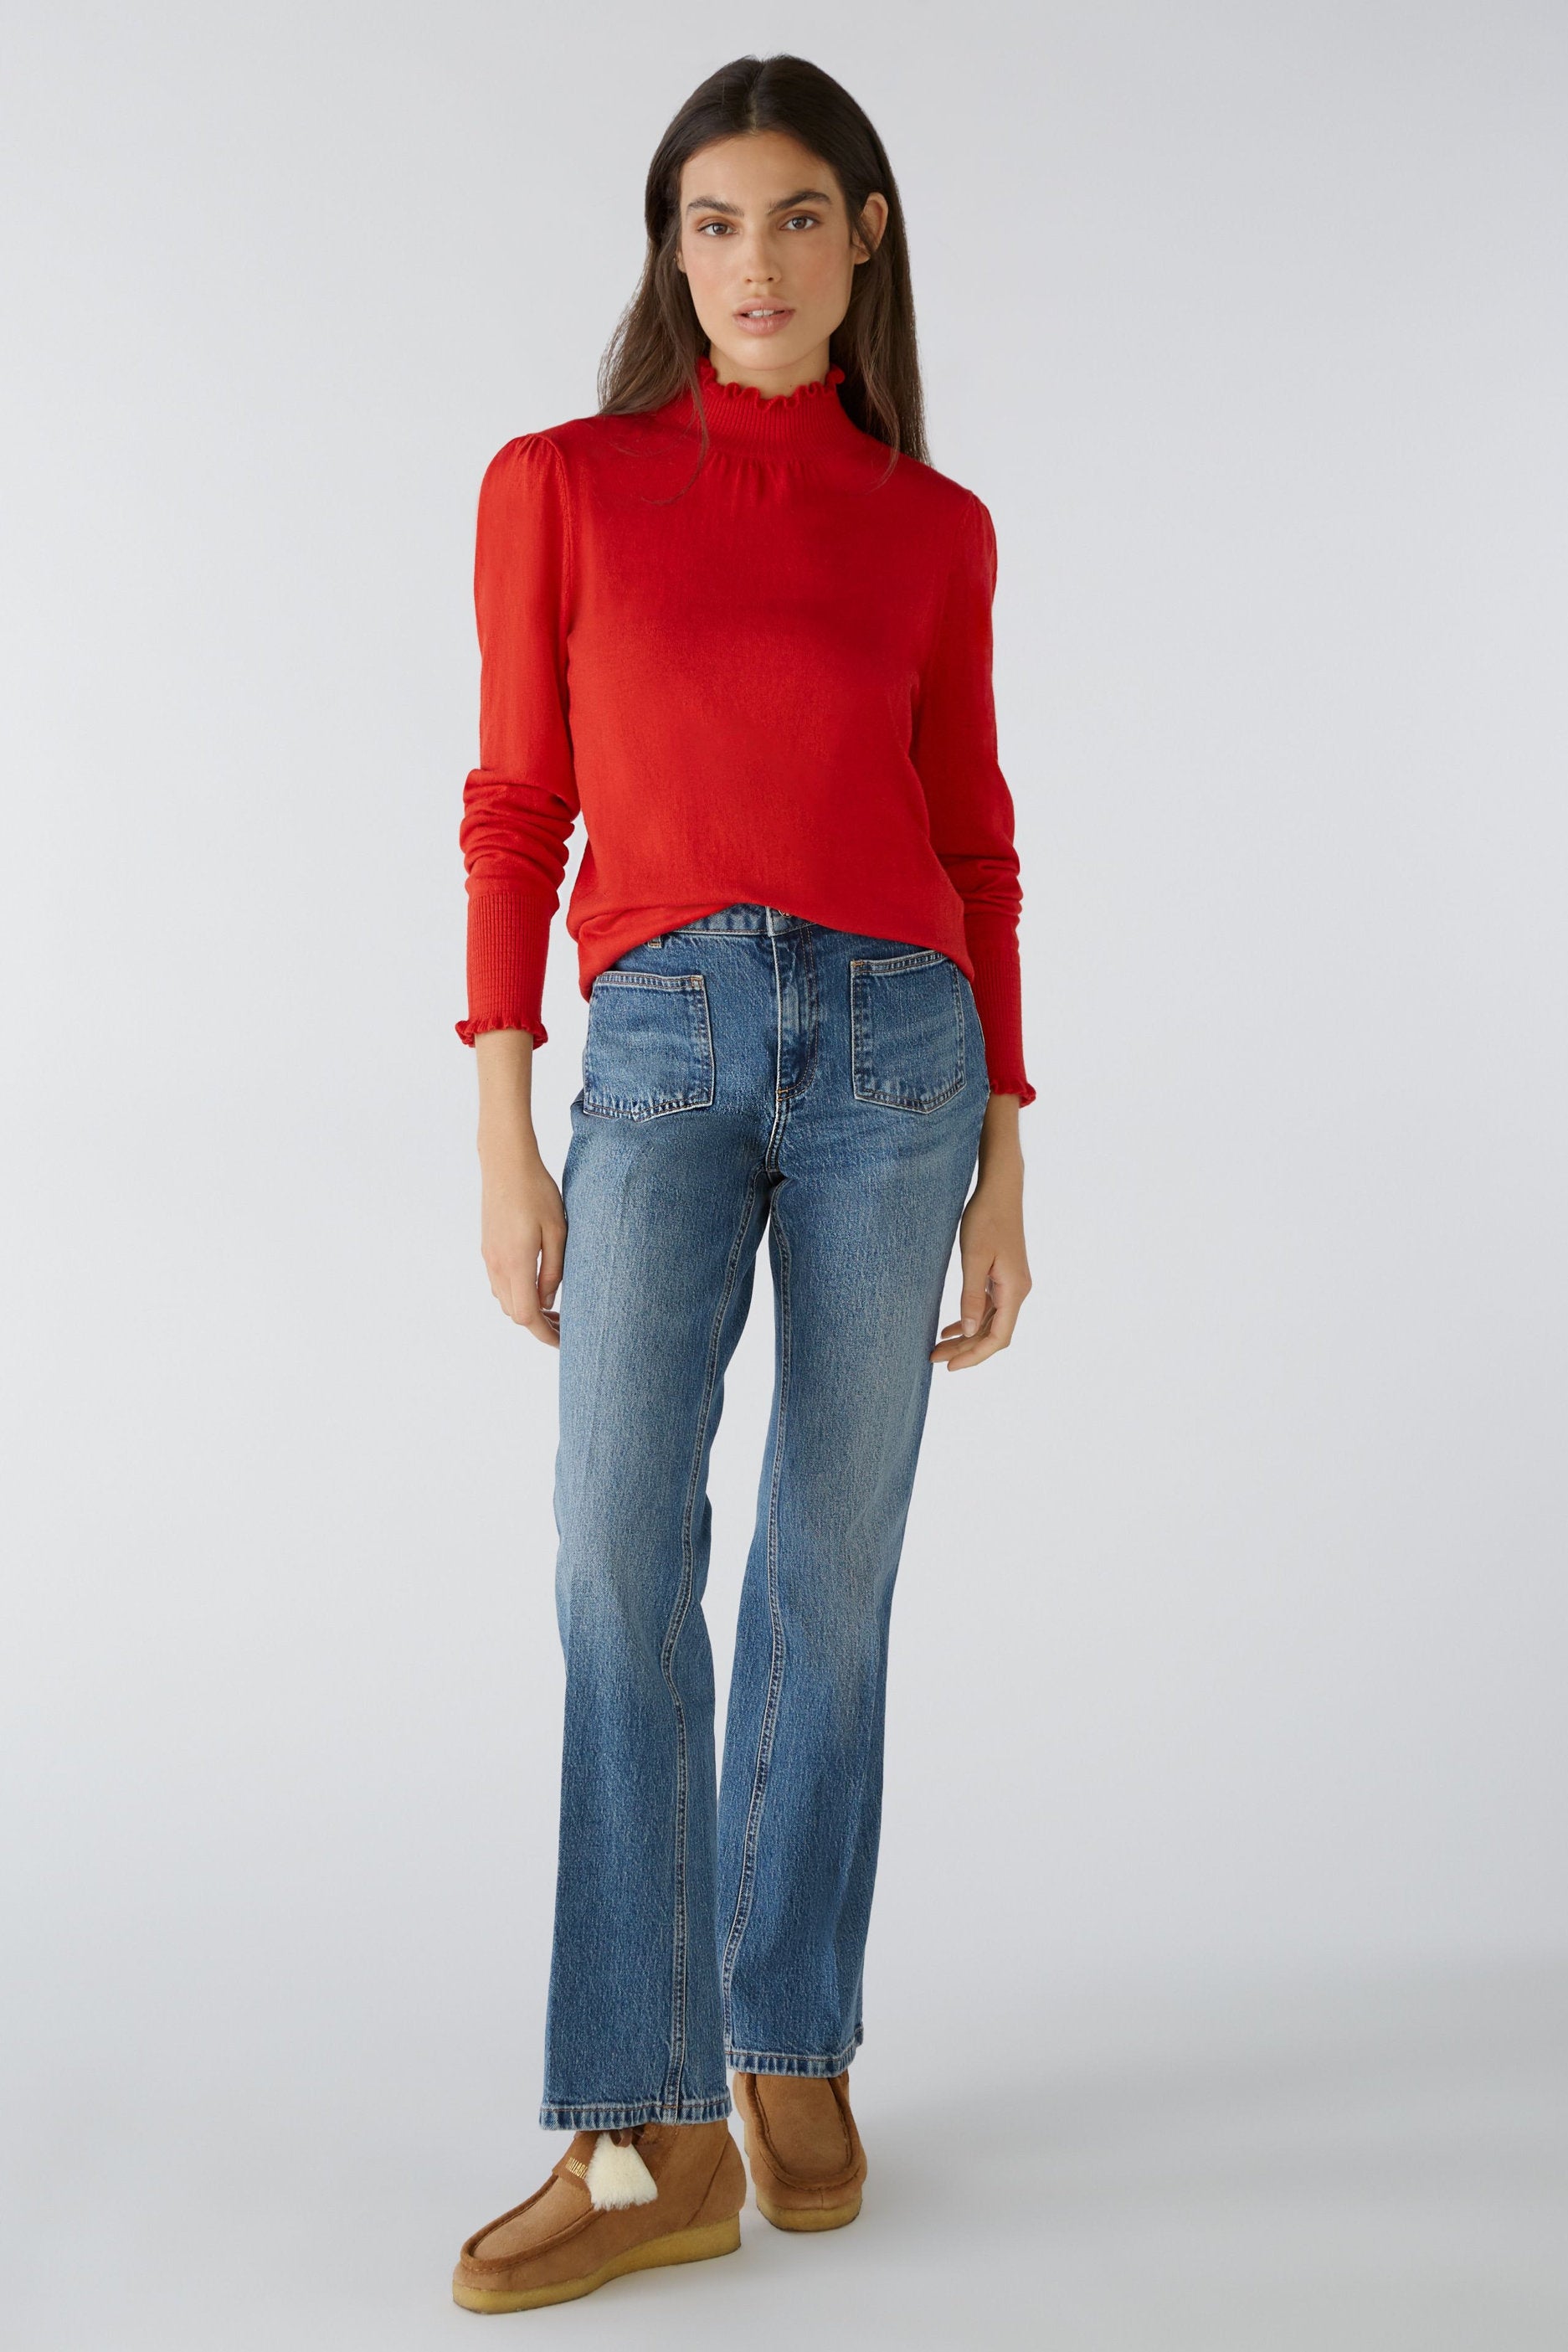 Jumper In Cotton Blend With Silk And Cashmere_79498_3654_01